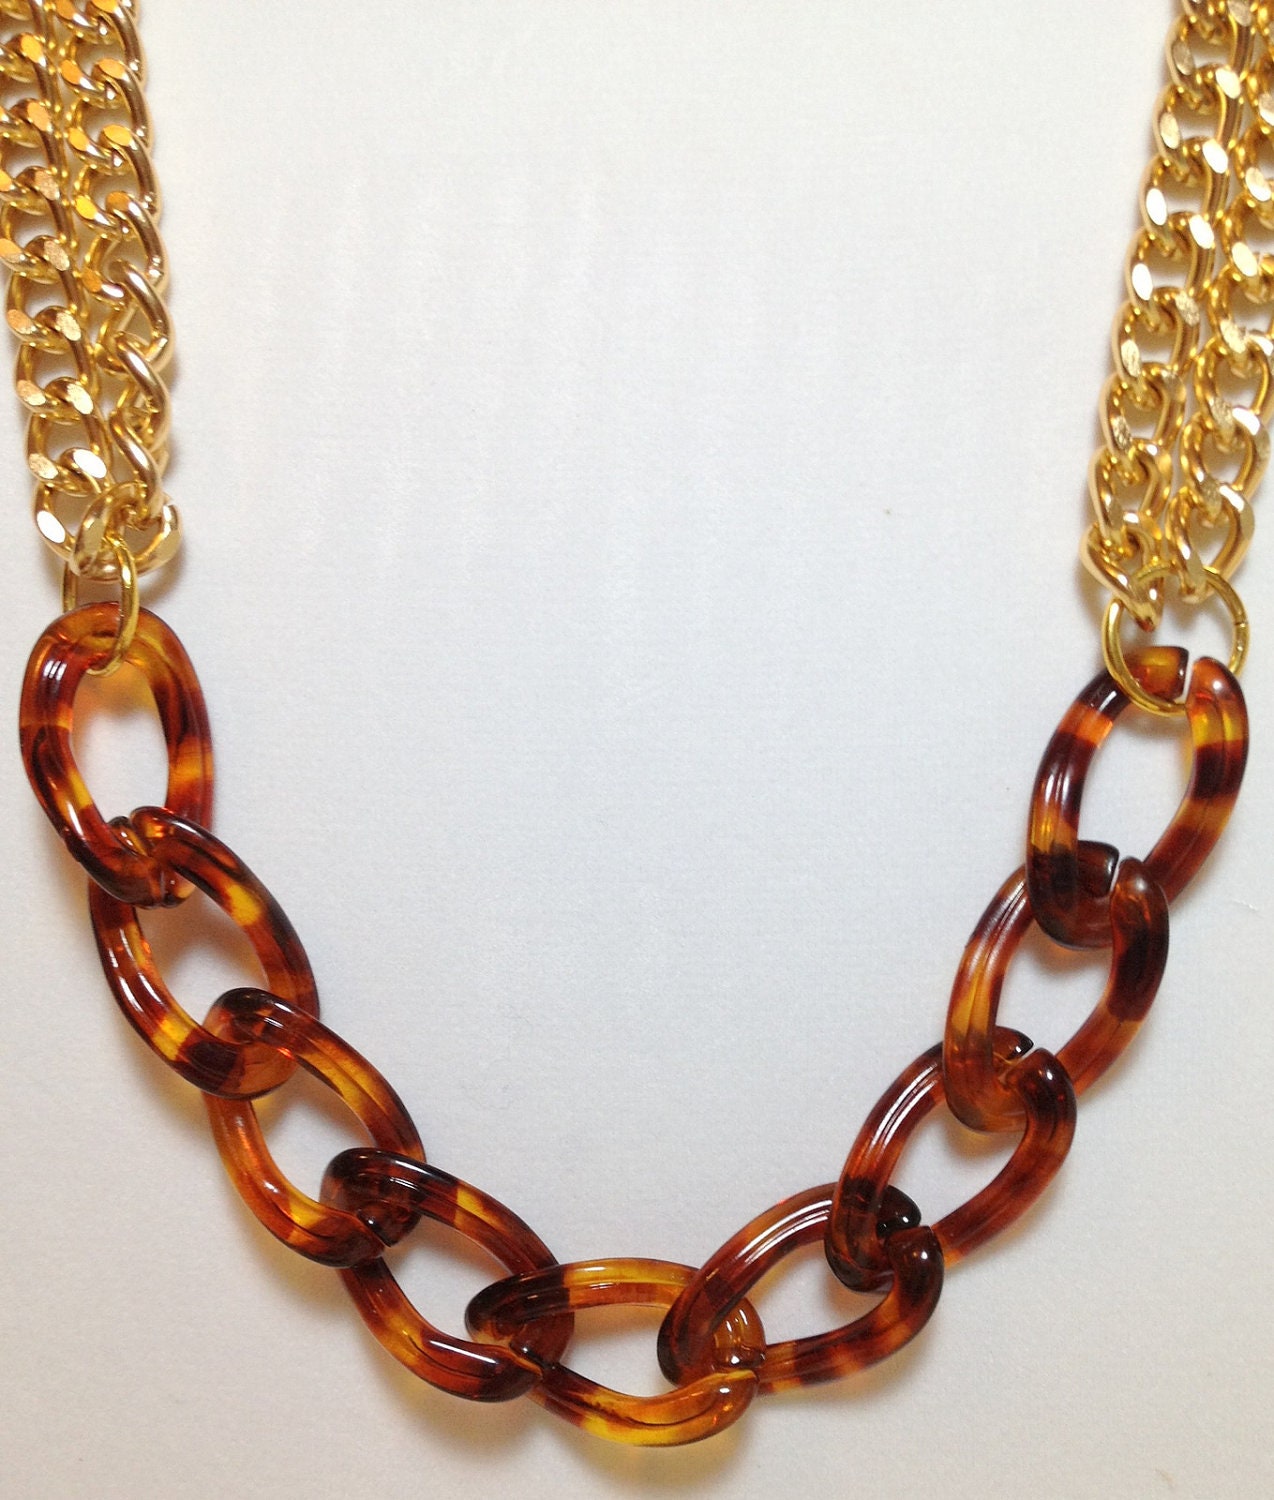 Gold Statement Necklace chunky necklace statement jewelry chain link tortoise RUMOR HAS IT